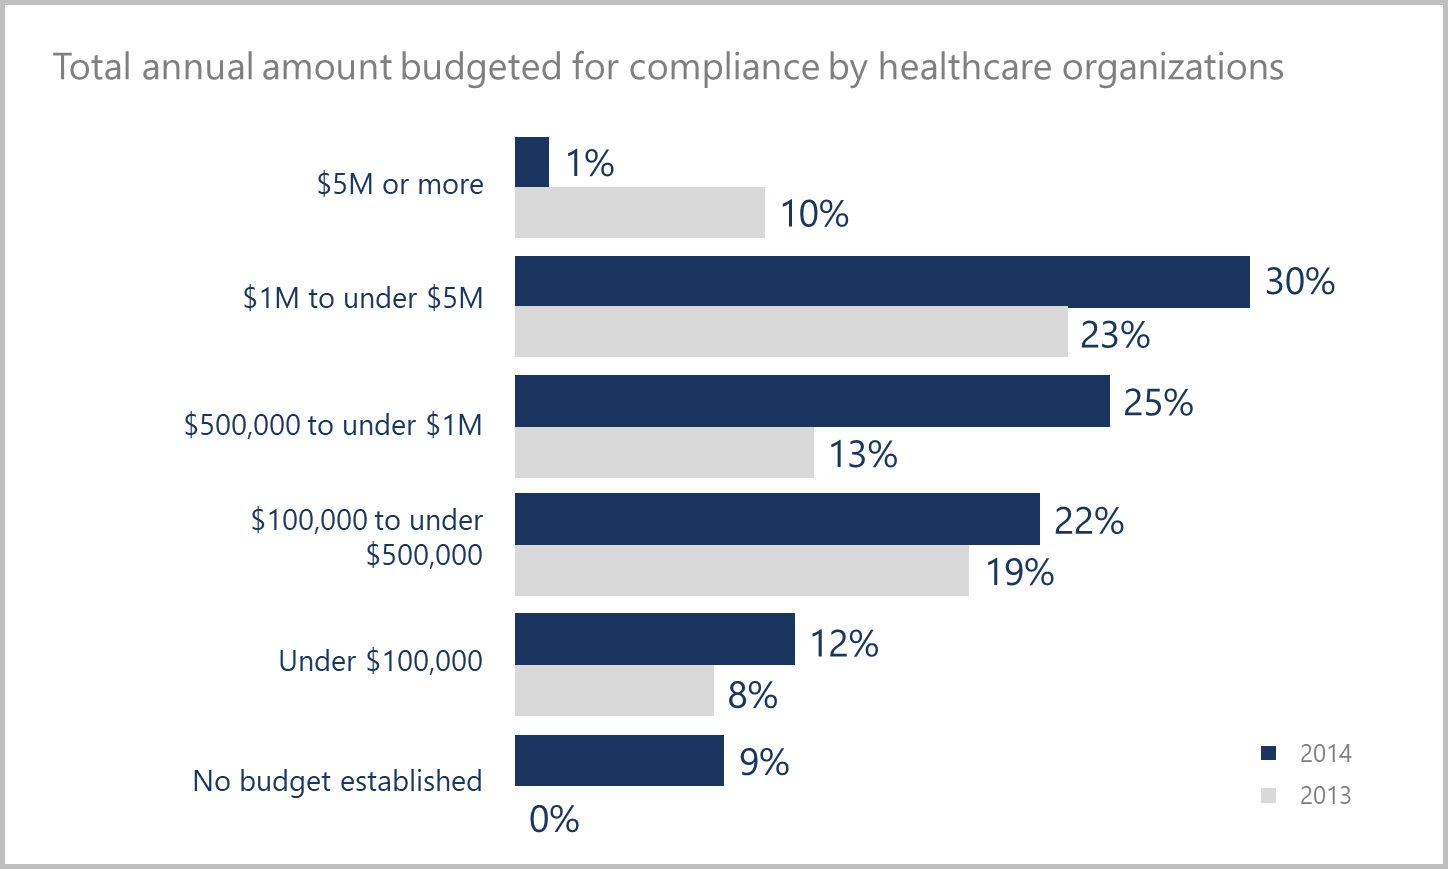 The cost of compliance for healthcare organizations